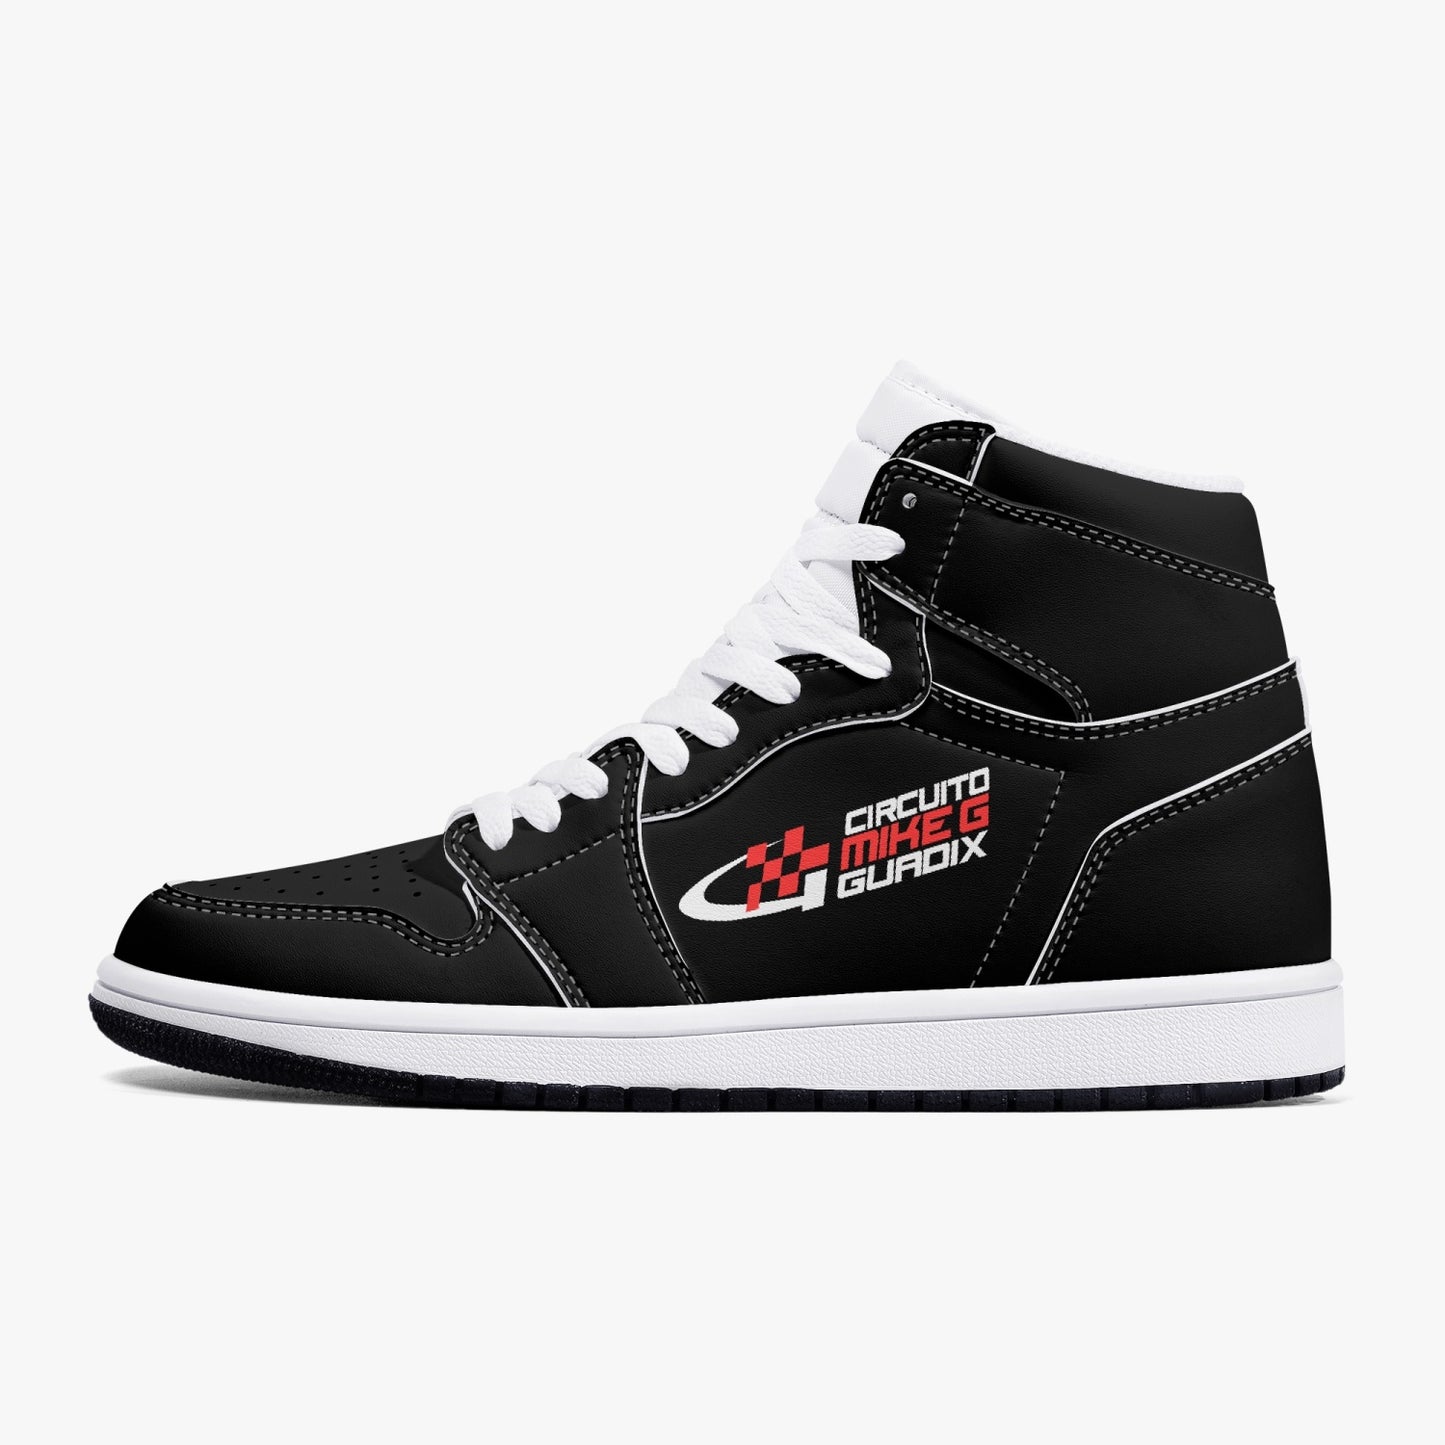 CIRCUITO MIKE G GUADIX Ultimate High-Top Leather Sneakers - full carbon